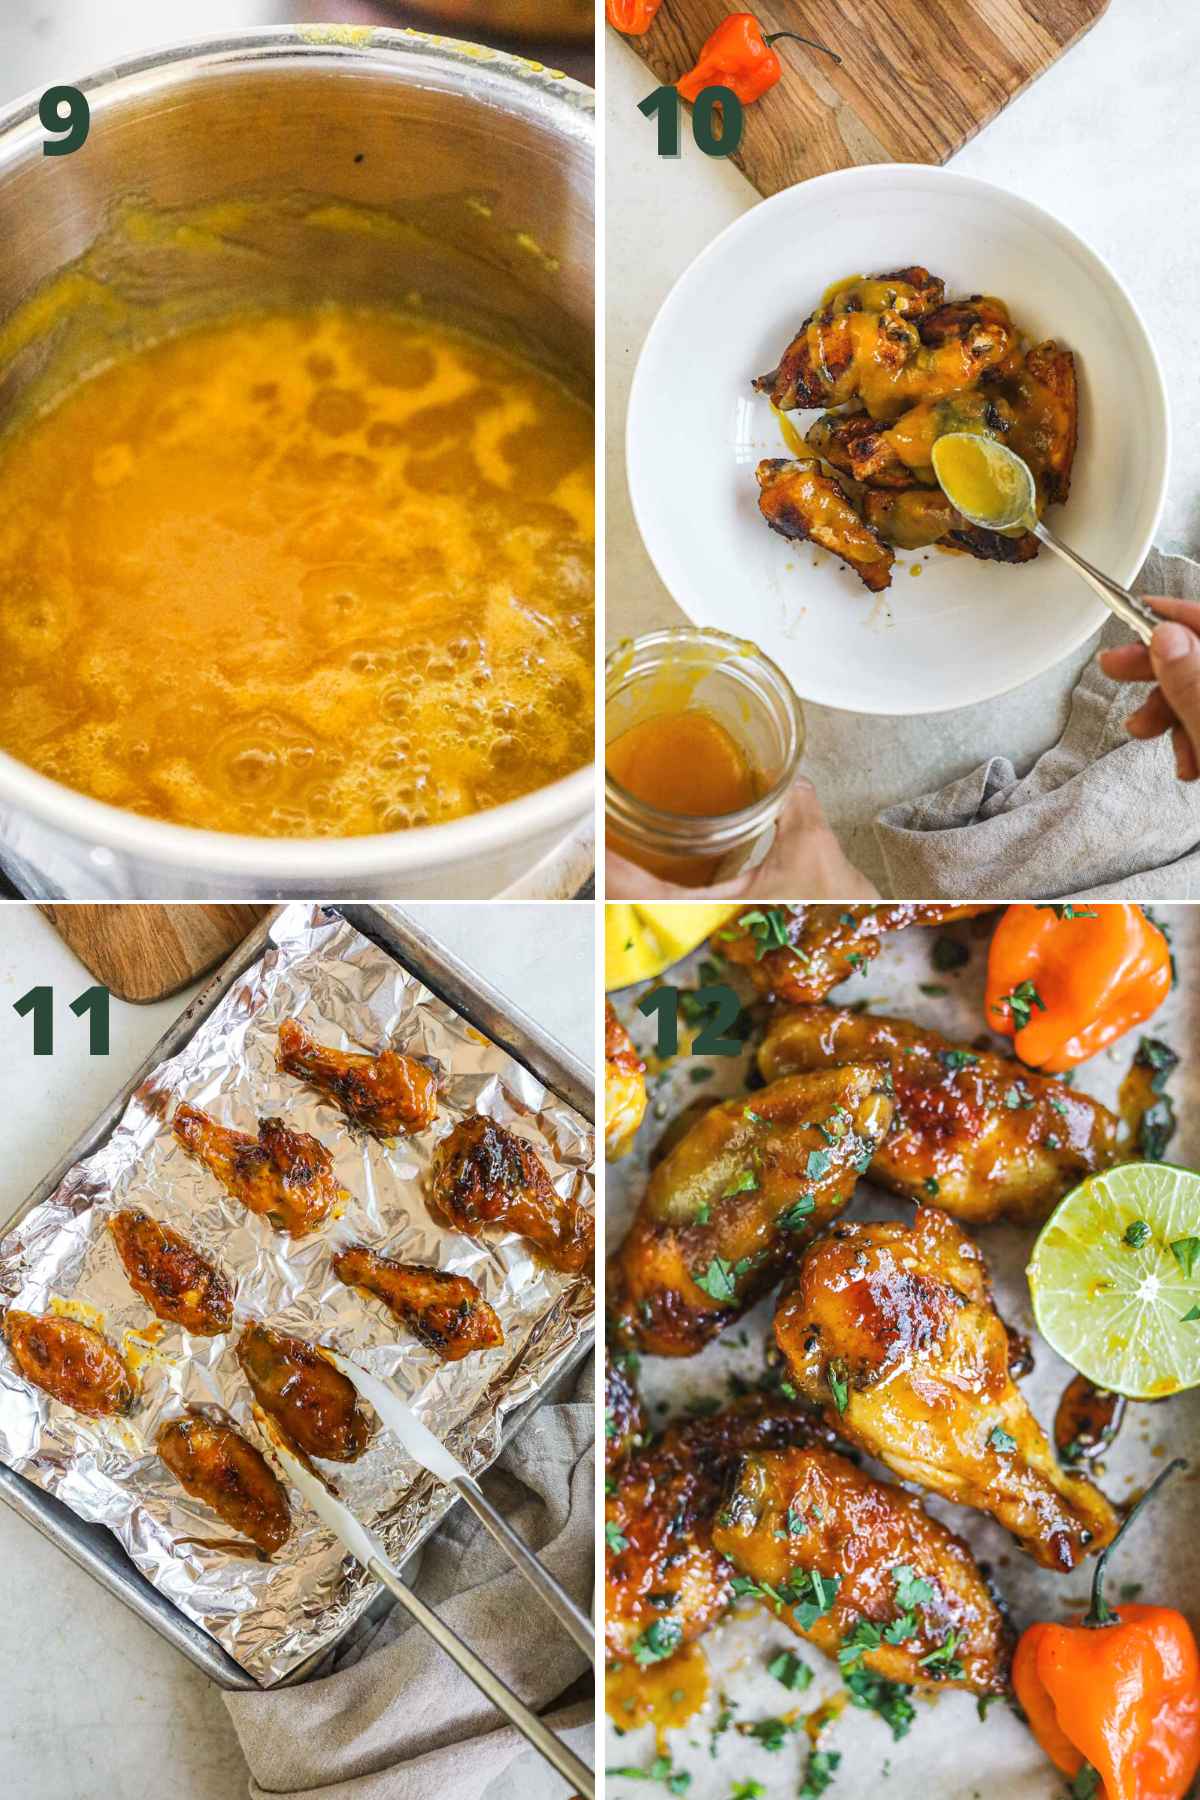 Steps to make mango habanero chicken wings, cooking mango habanero sauce, tossing wings, and baking again.